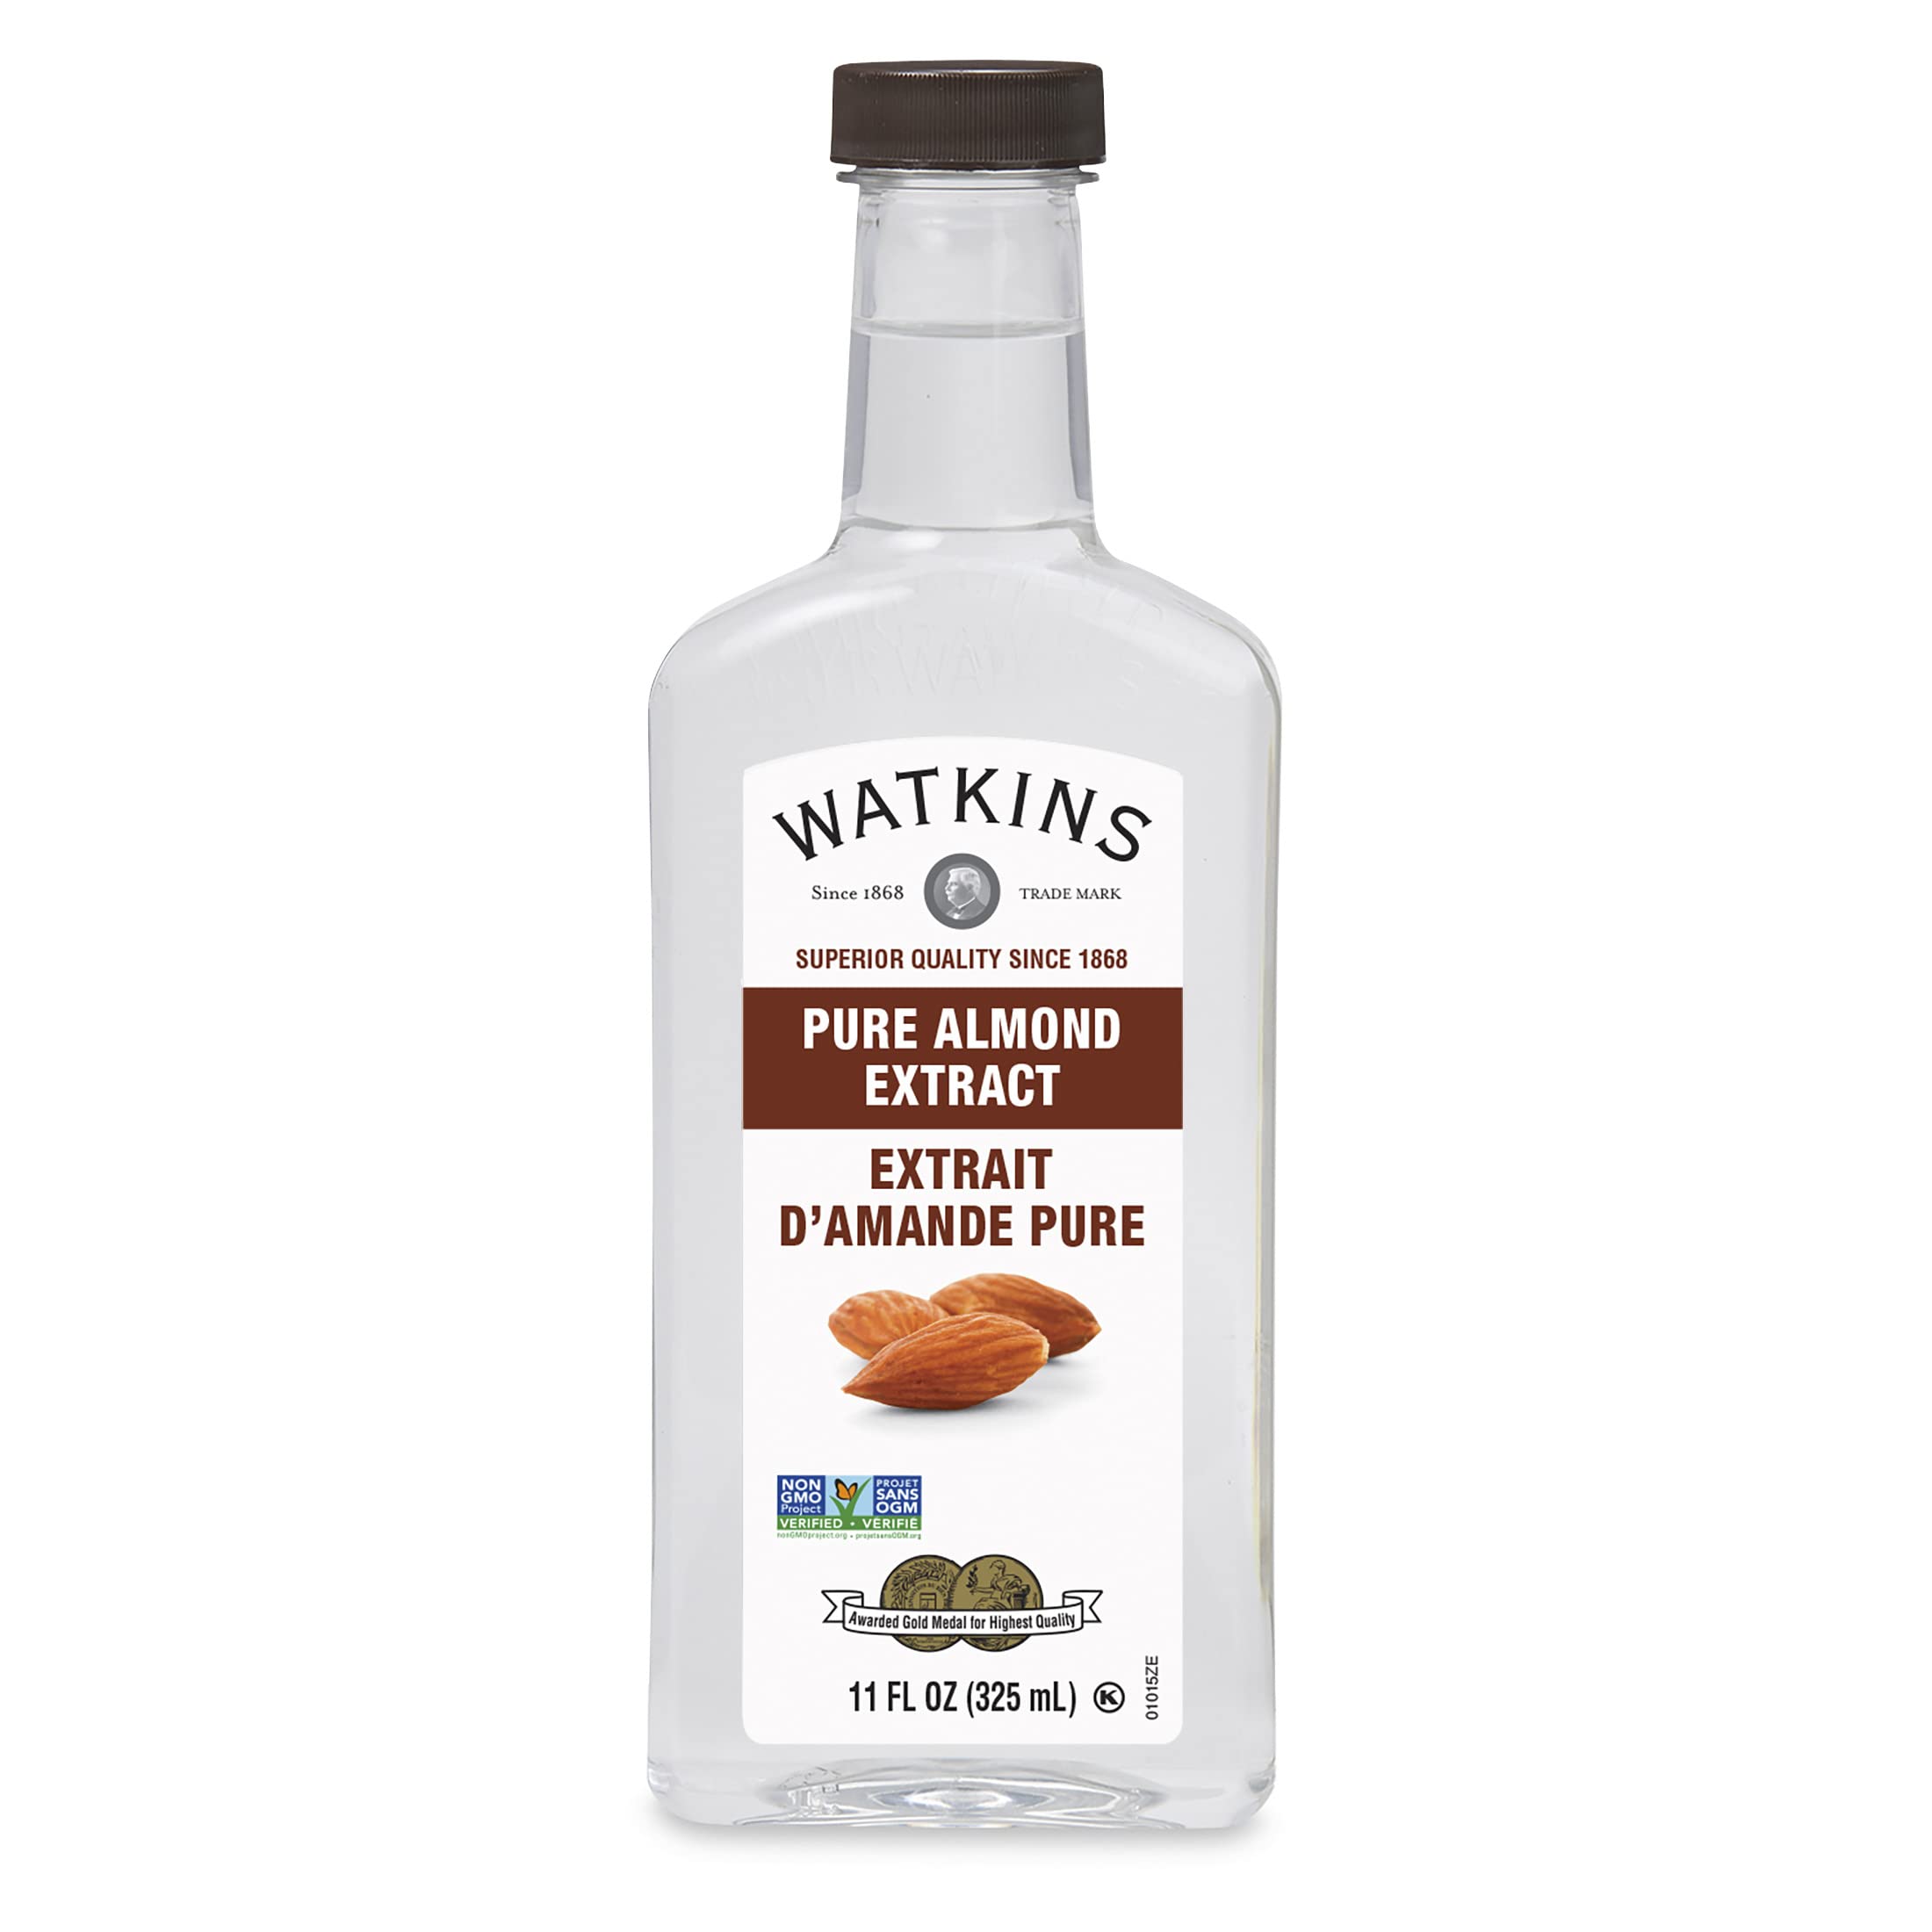 Watkins Pure Almond Extract, 11 oz. Bottle, 1 Count